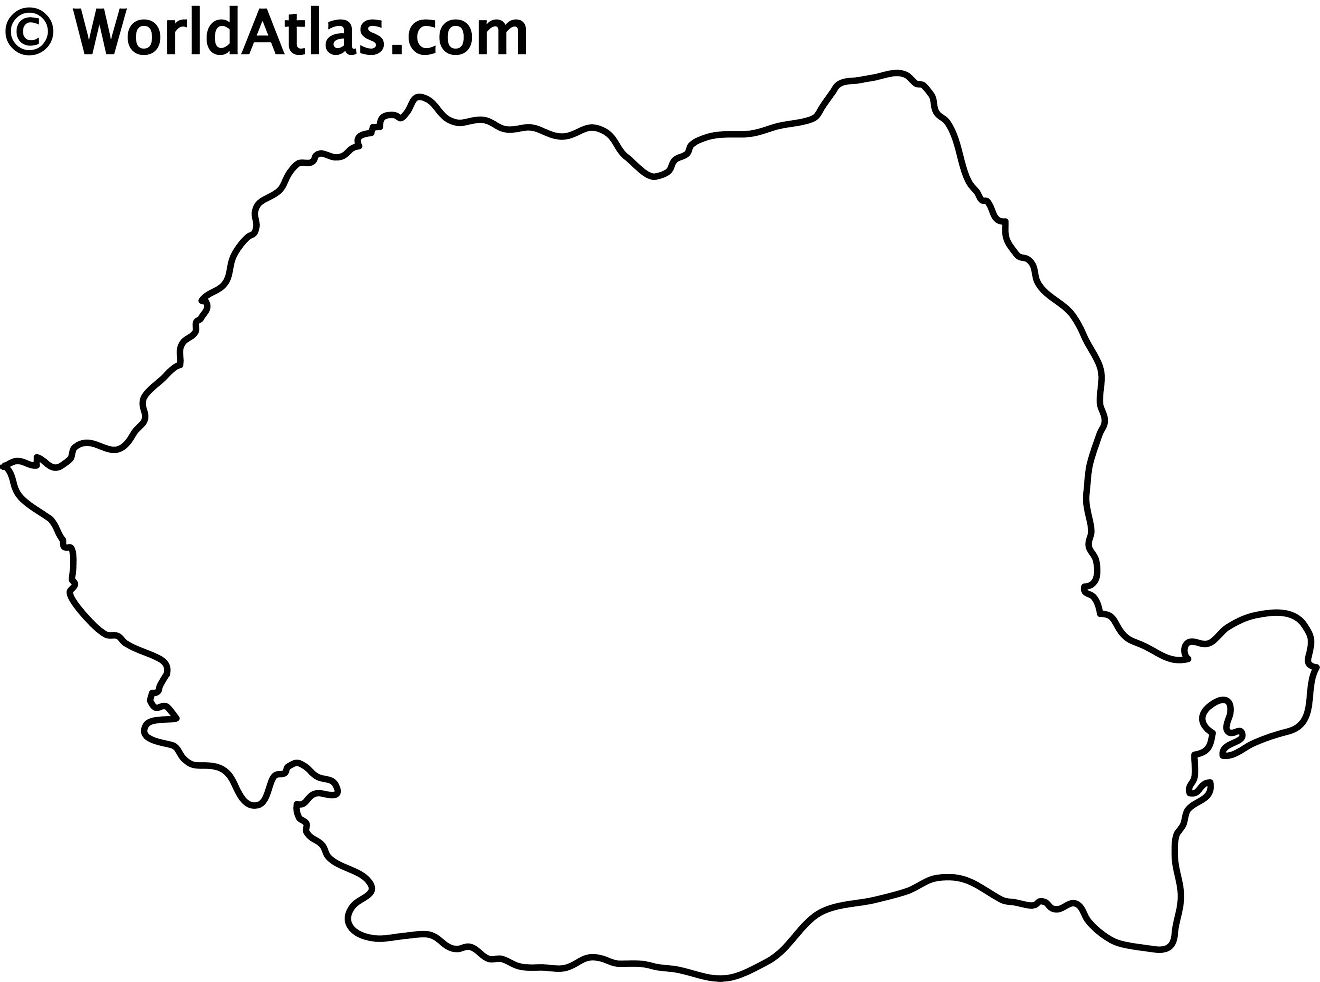 Blank Outline Map of Romania